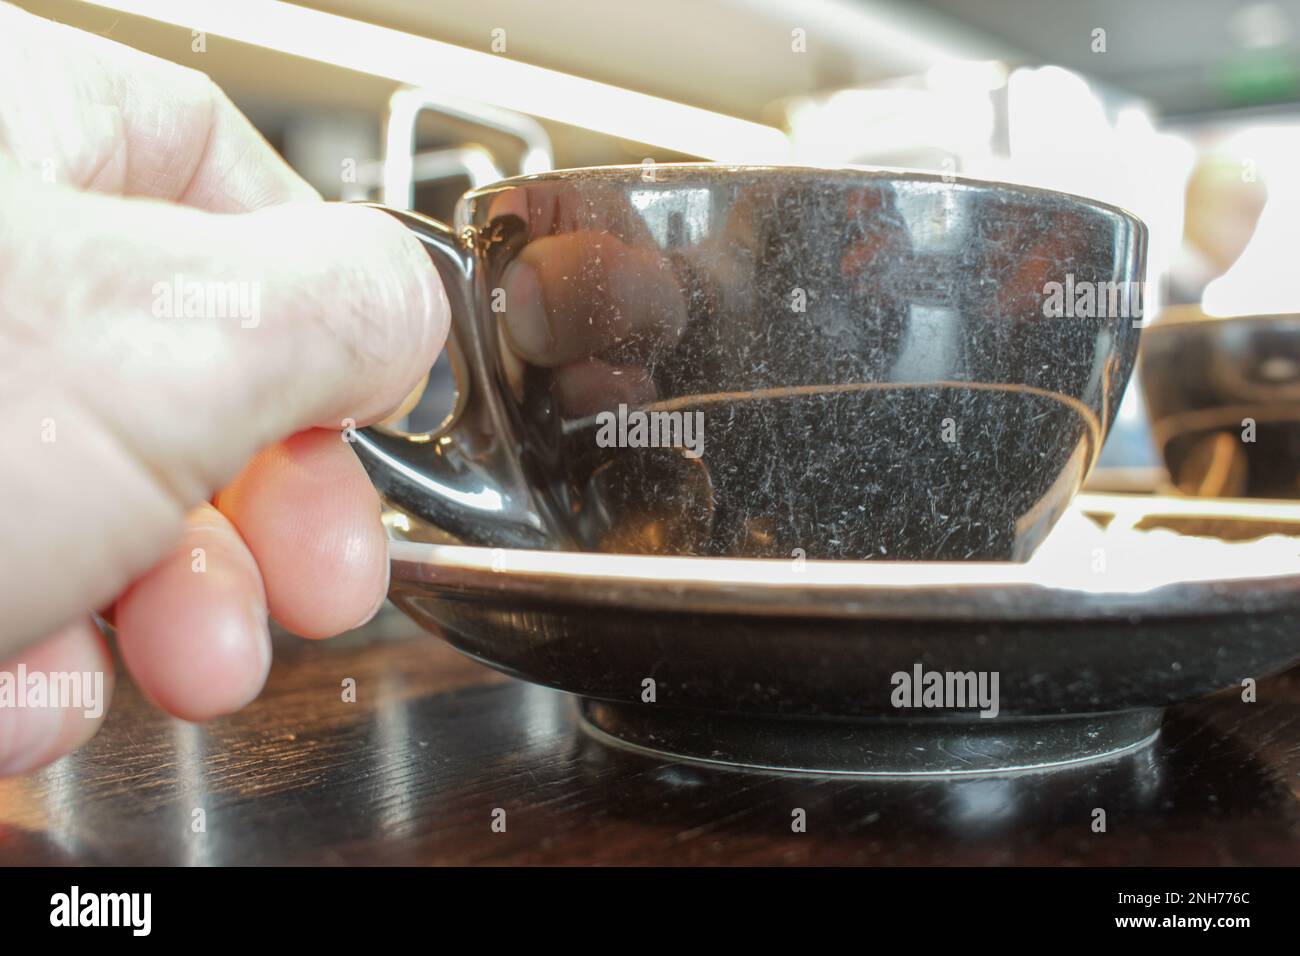 having a cup of coffee in a cafeteria in the morning Stock Photo